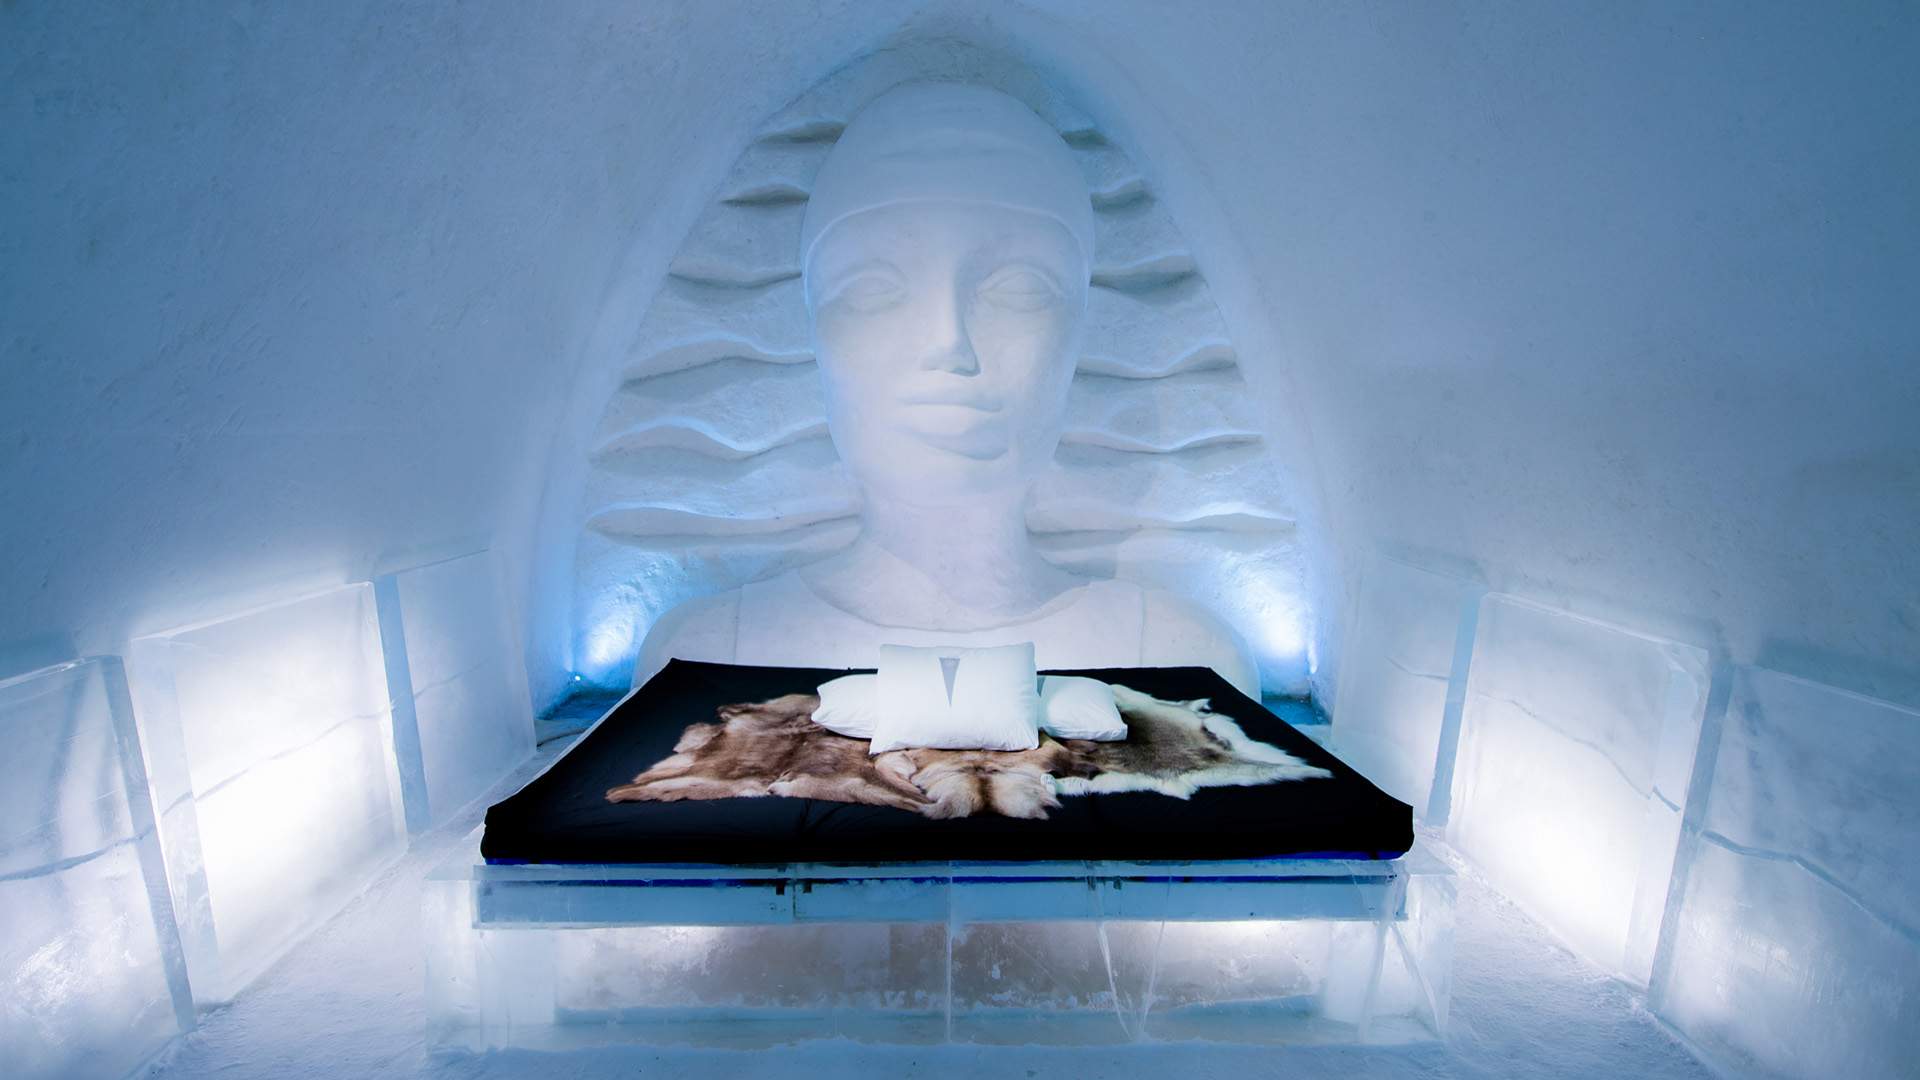 Sweden's Ice Hotel Has Unveiled Its New Batch of Super-Chilled Artist-Created Rooms